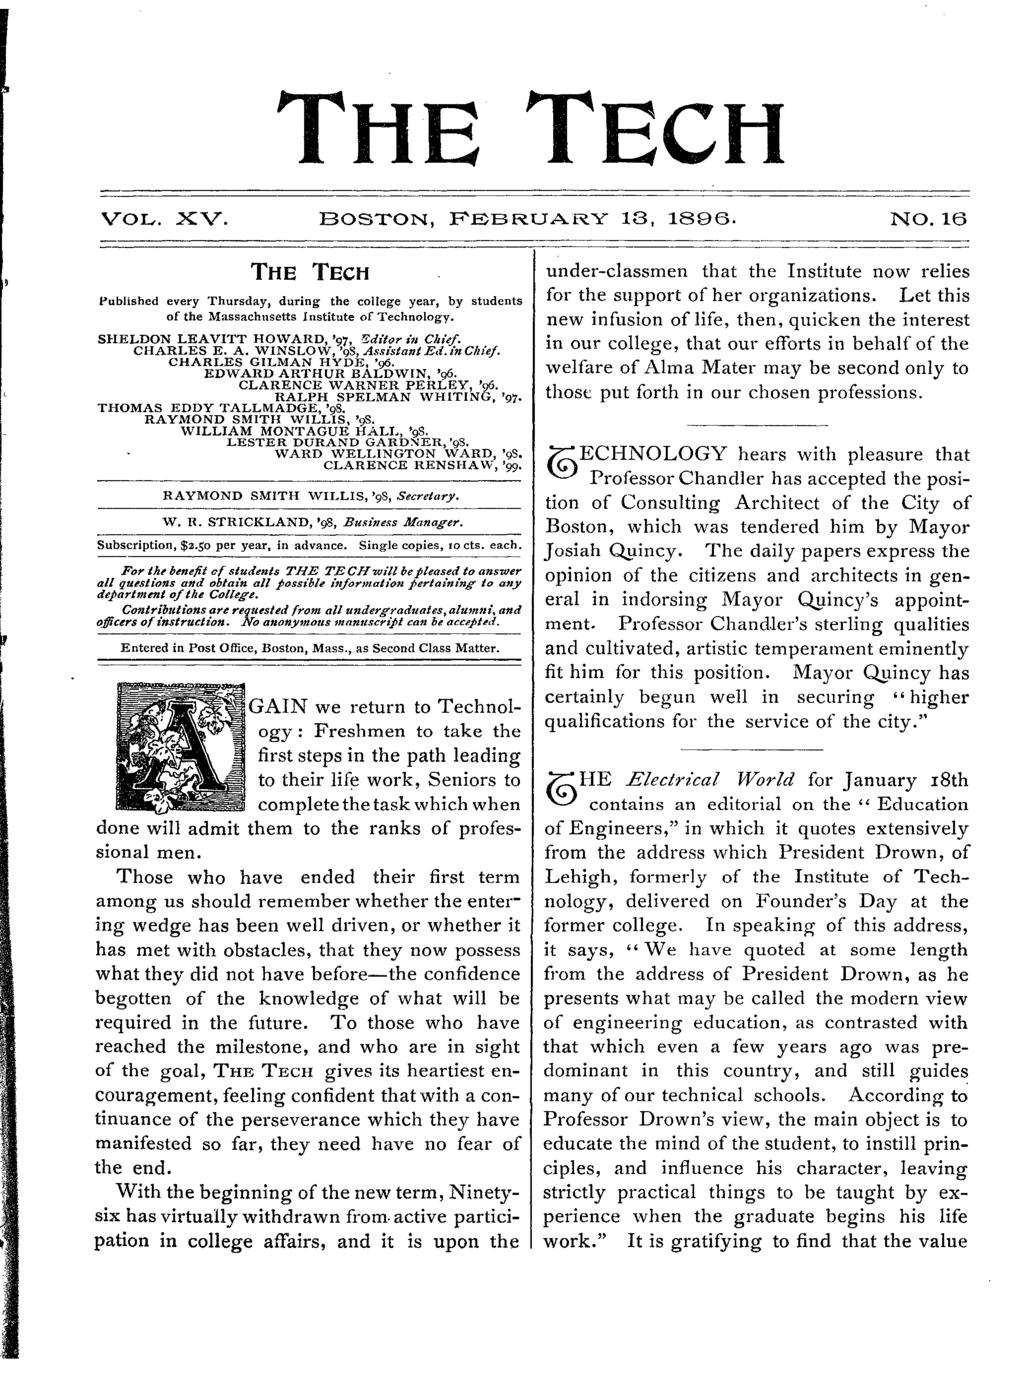 THE TECH VOL. XV. BOSTON, FEBRUARY 13, 1896. NO. 16 1, F r THE TECH Publshed every Thursday, durng the college year, by students of the Massachusetts nsttute of Technology.